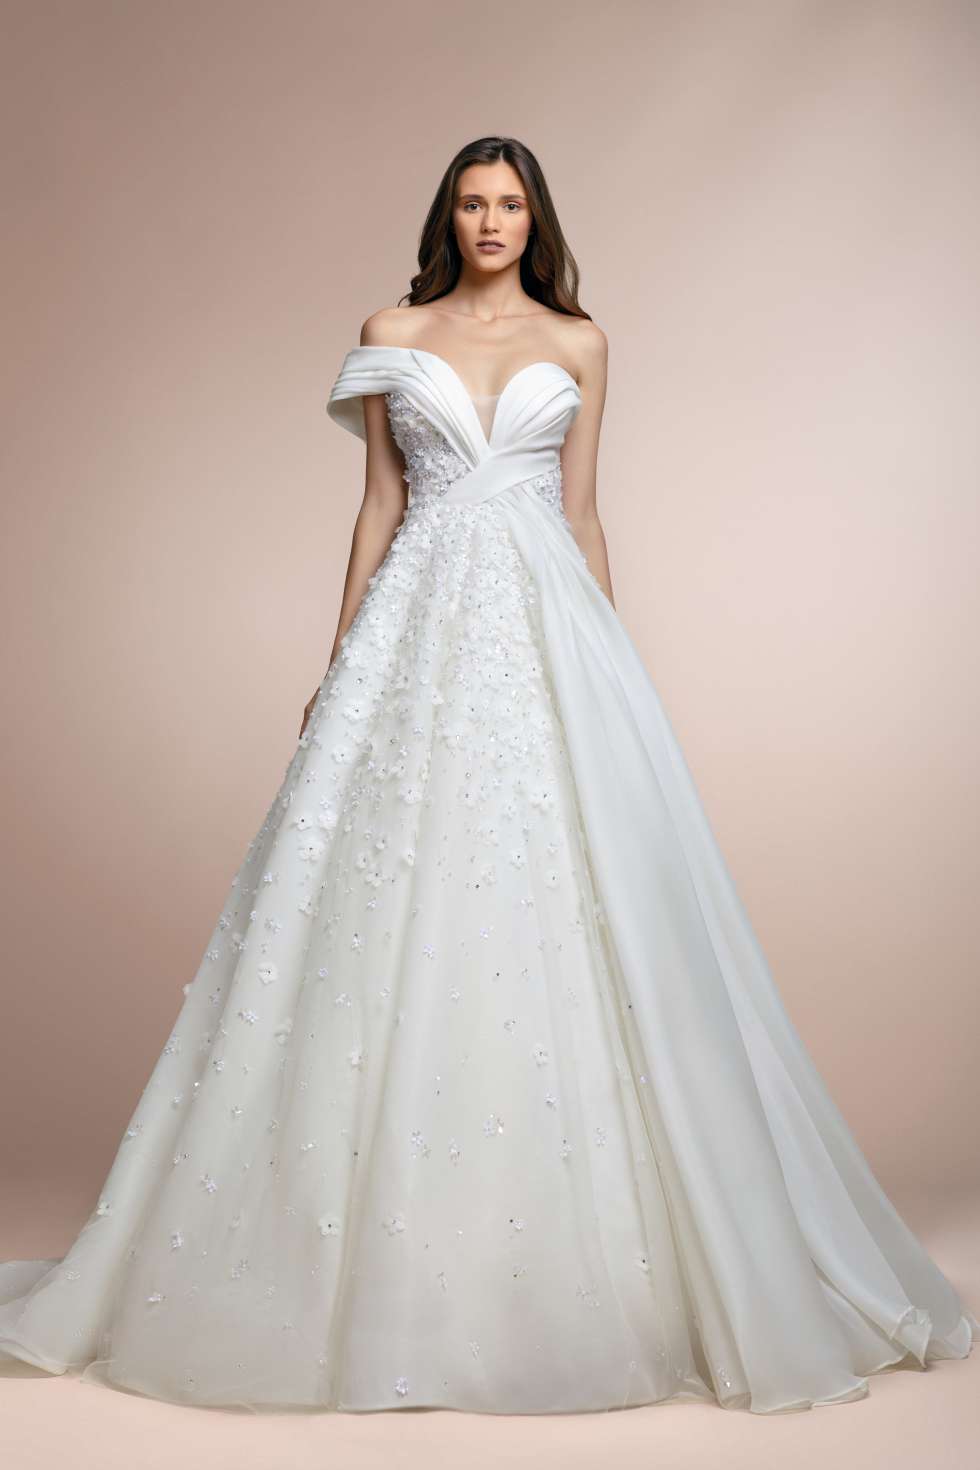 Plume by Esposa 2020 Collection Inspired by Fairytale Memories